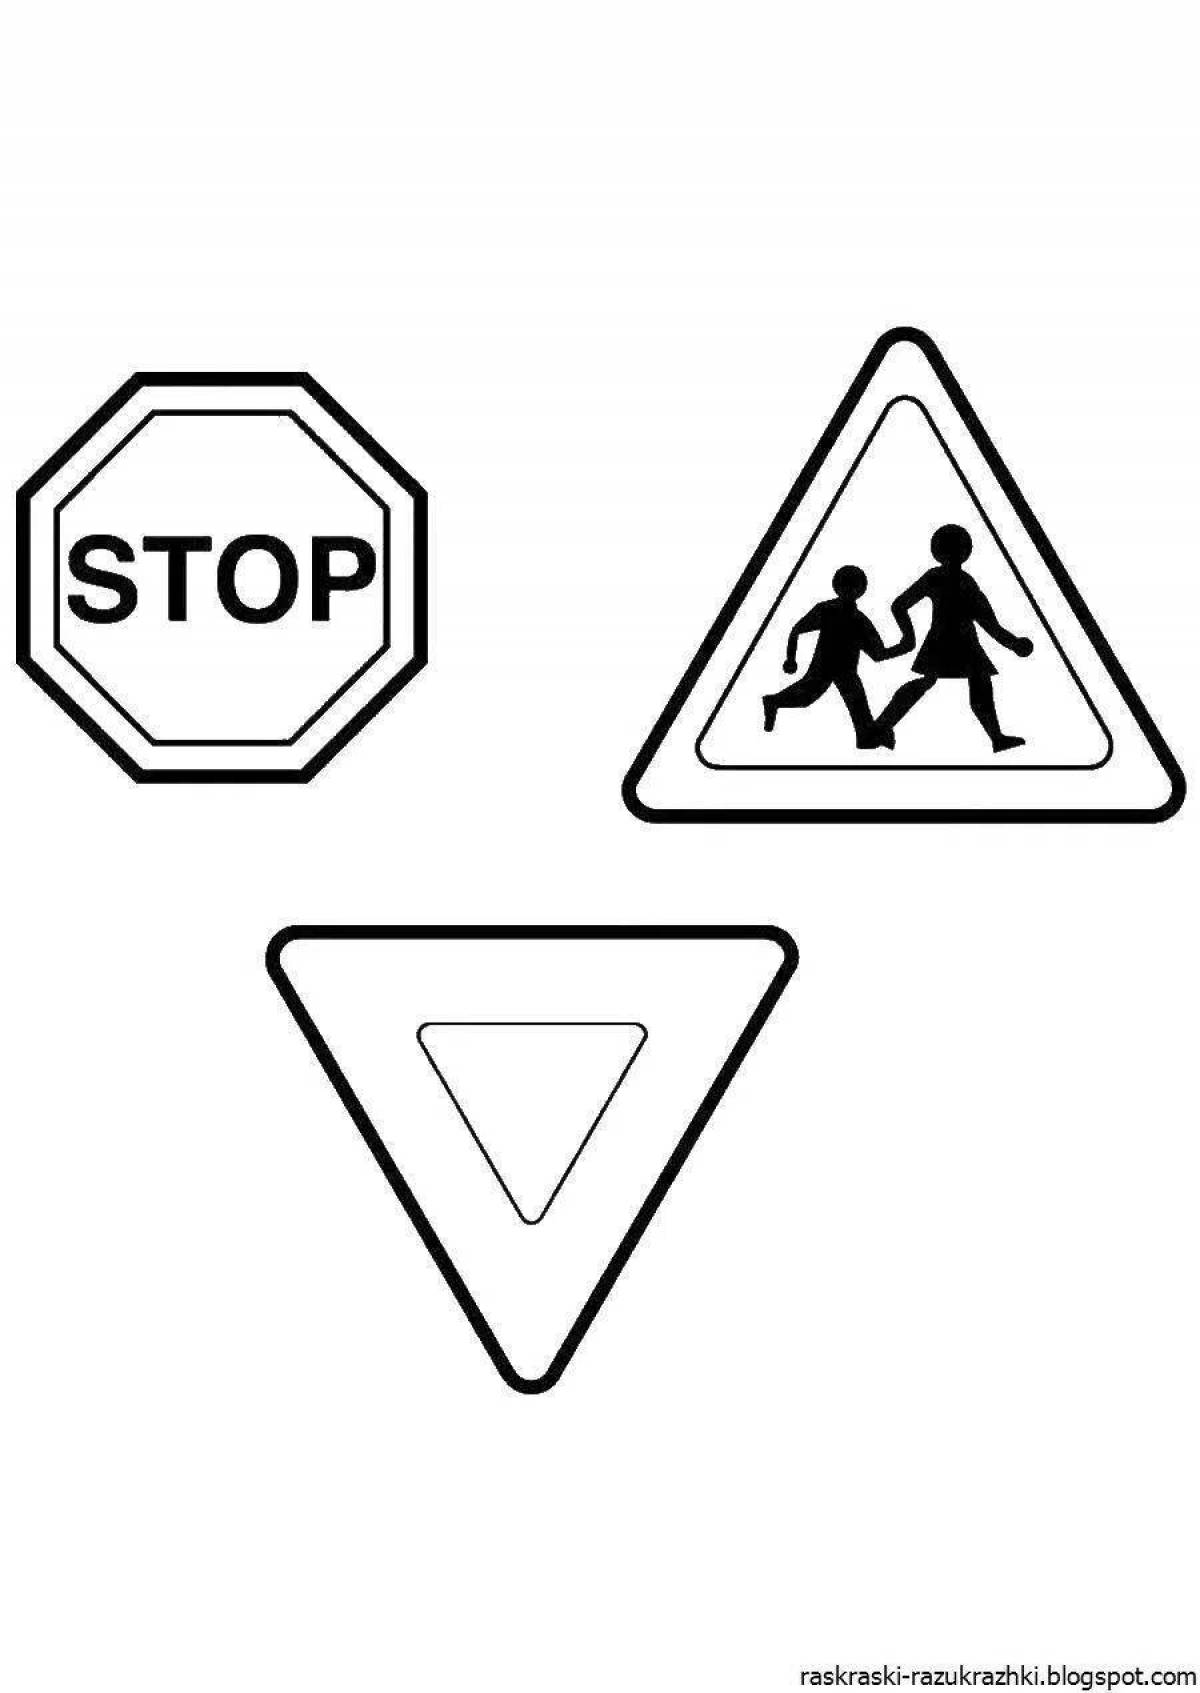 Crazy Colored Road Sign Coloring Pages for Kids